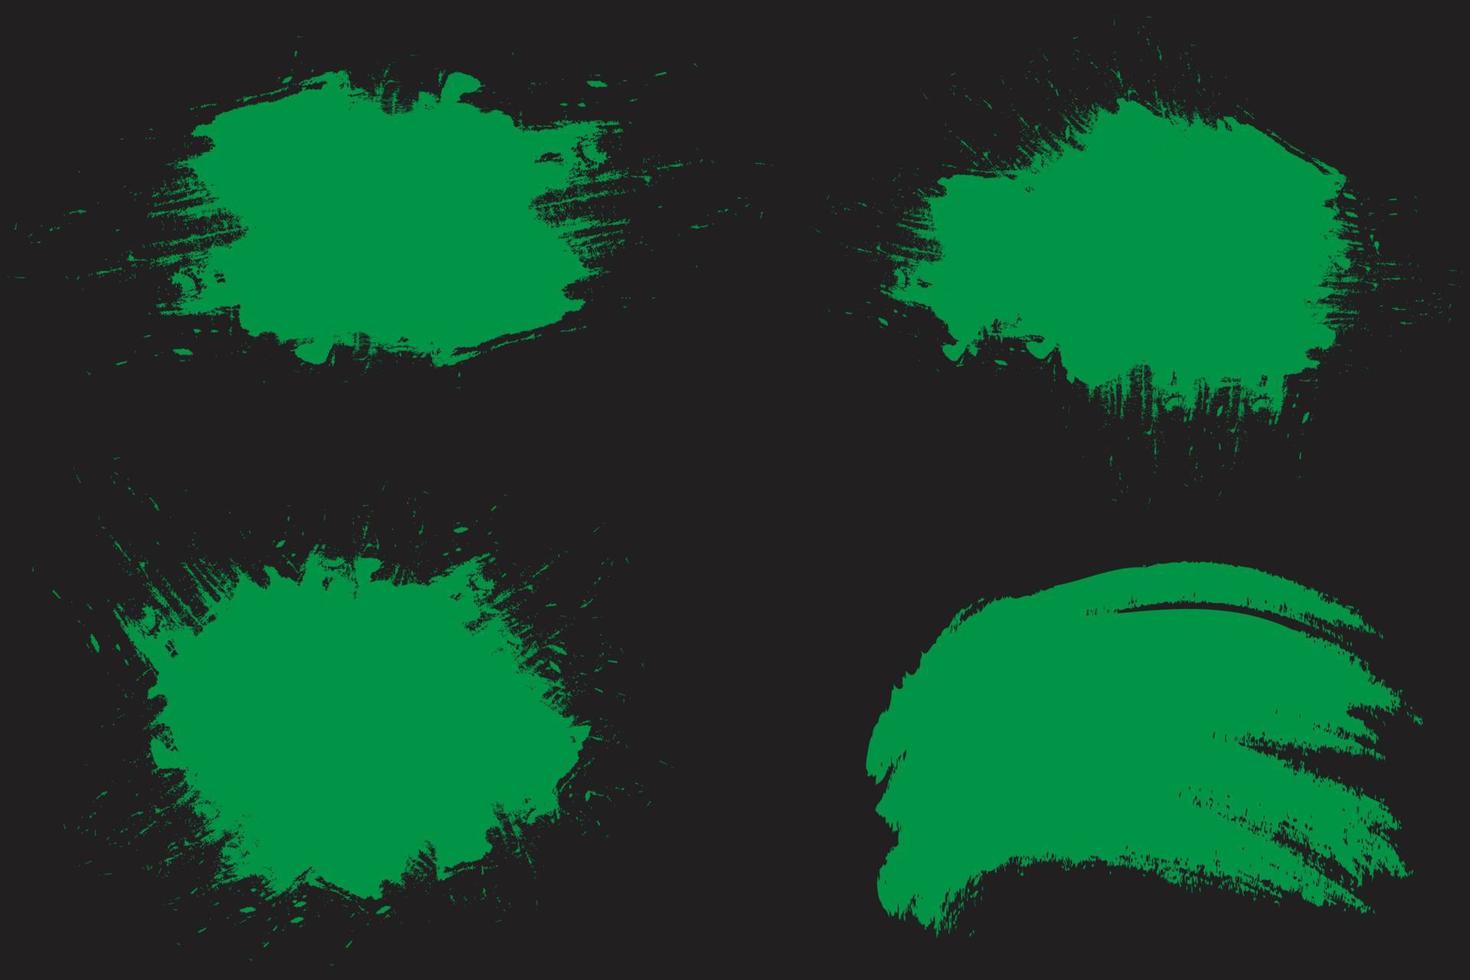 Green painted grunge abstract background vector